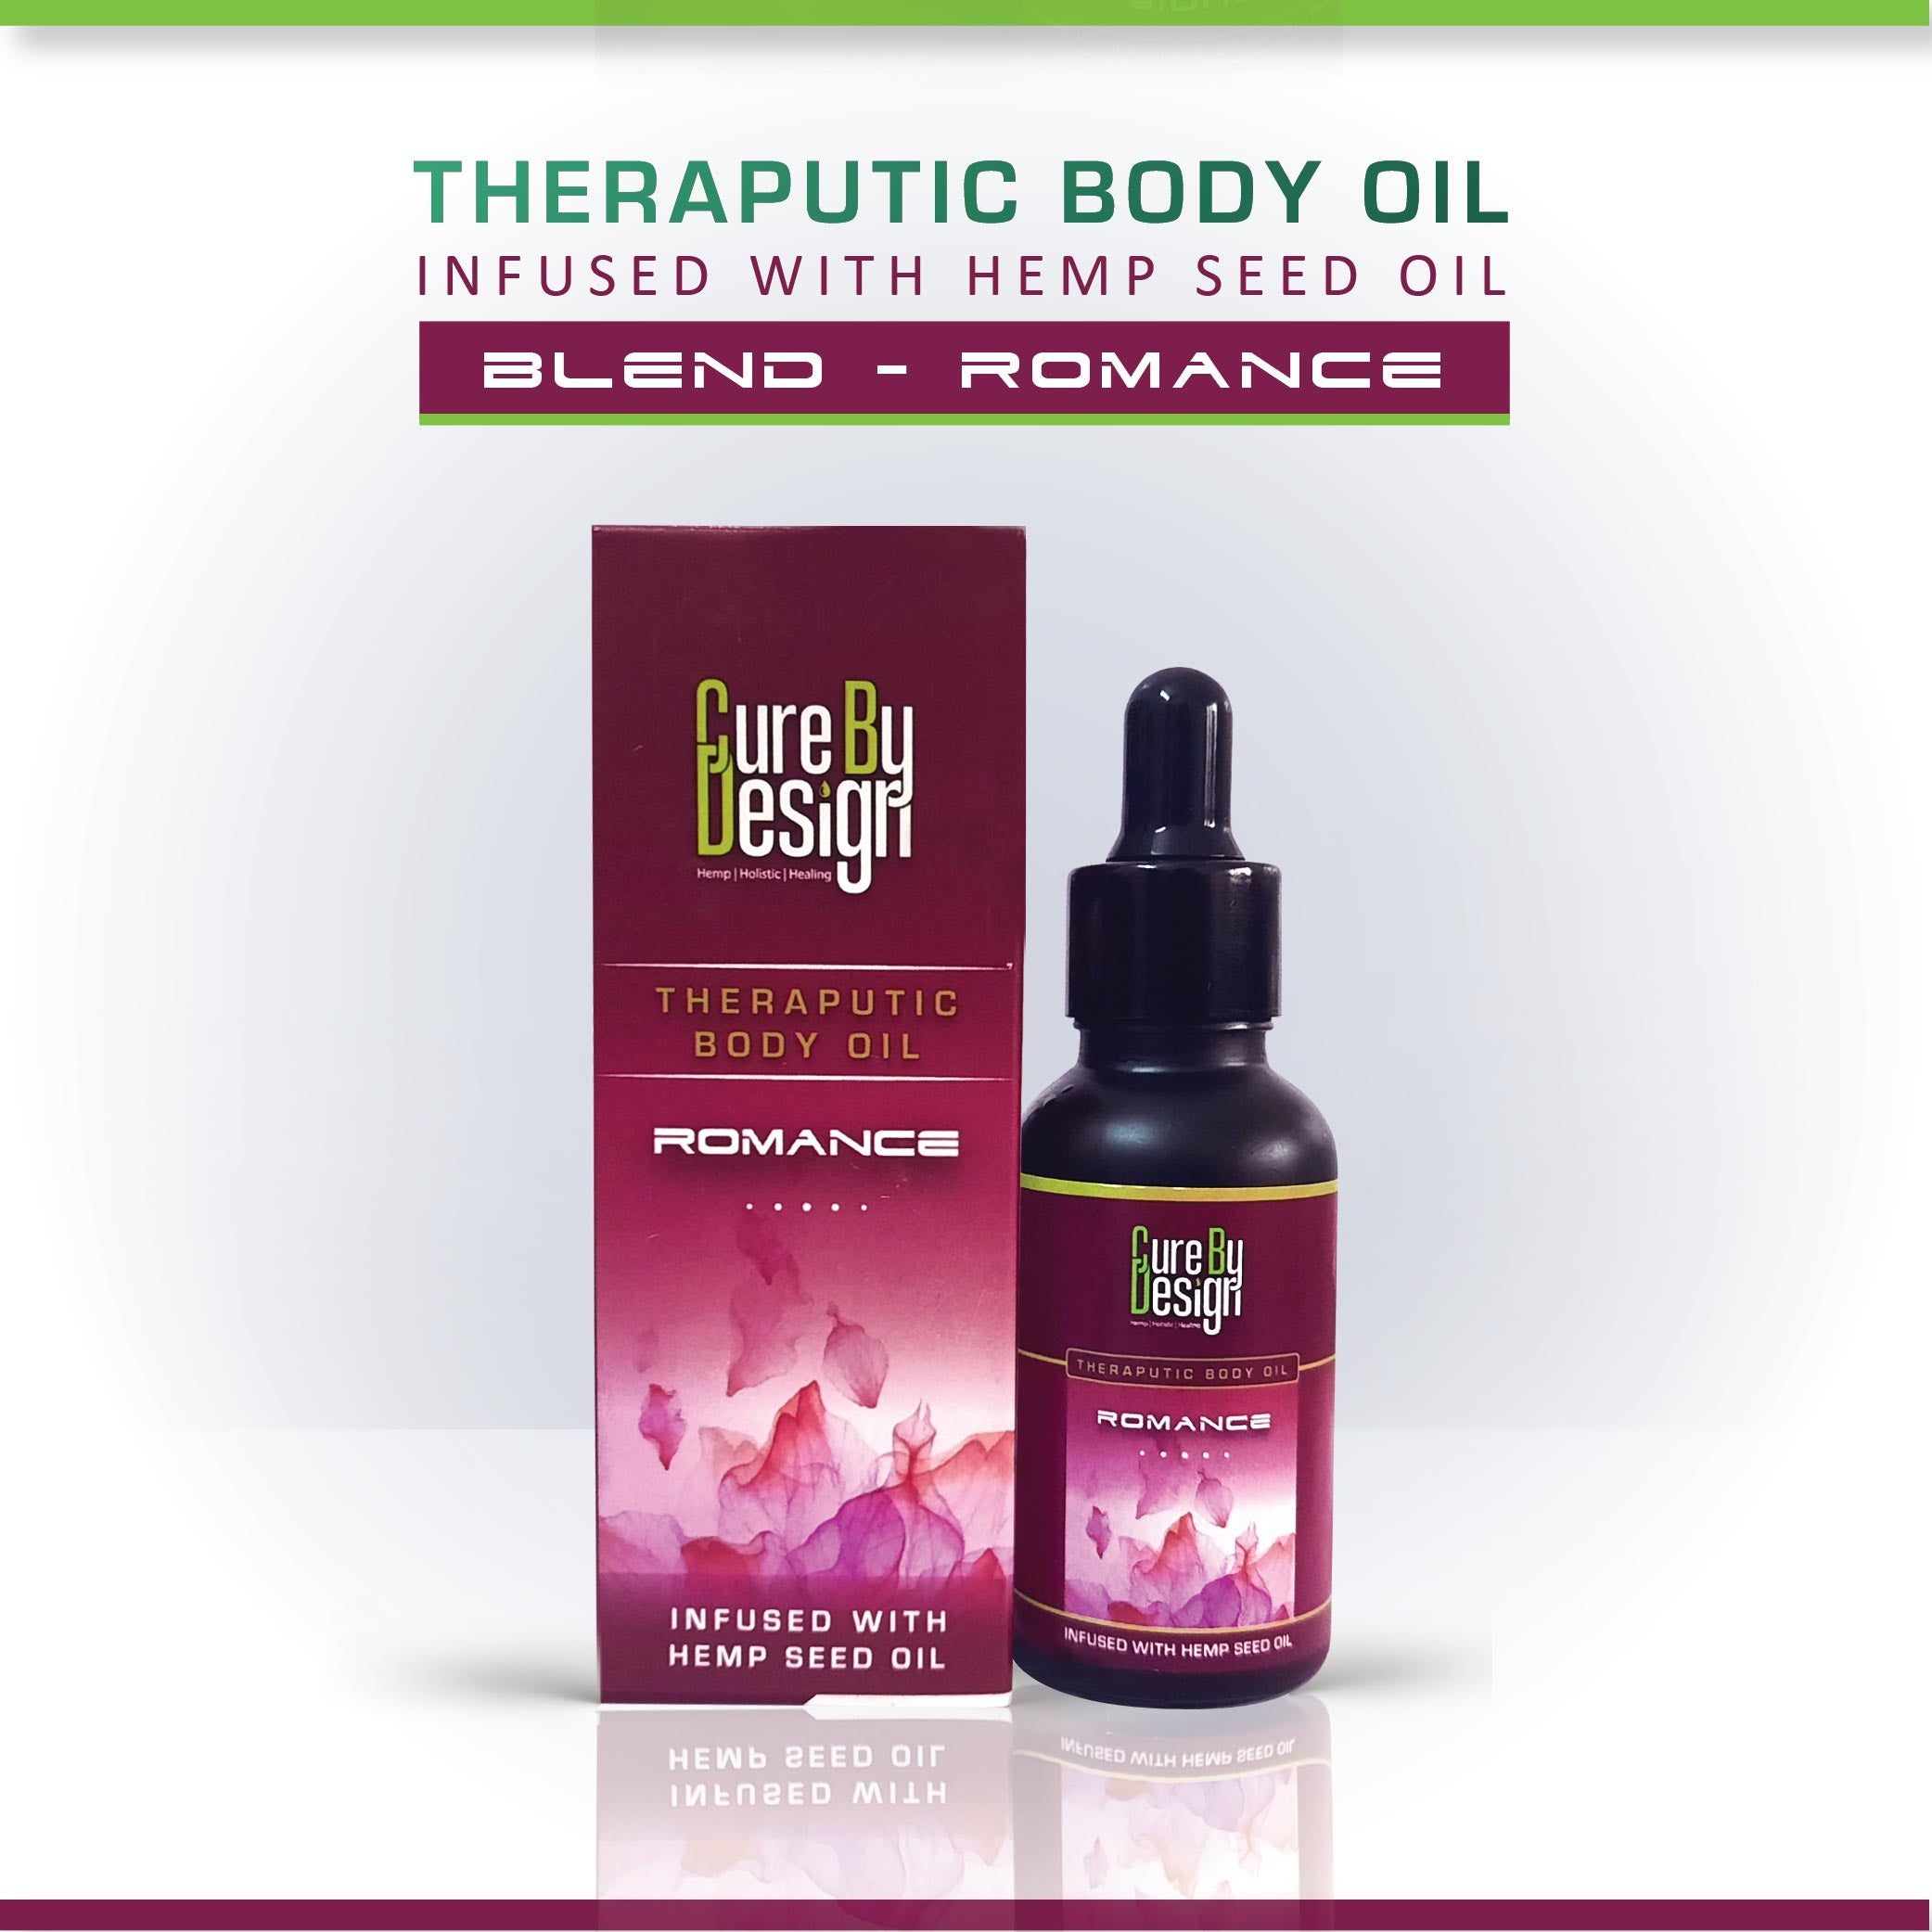 Cure By Design Therapeutic Healing Blend - Romance